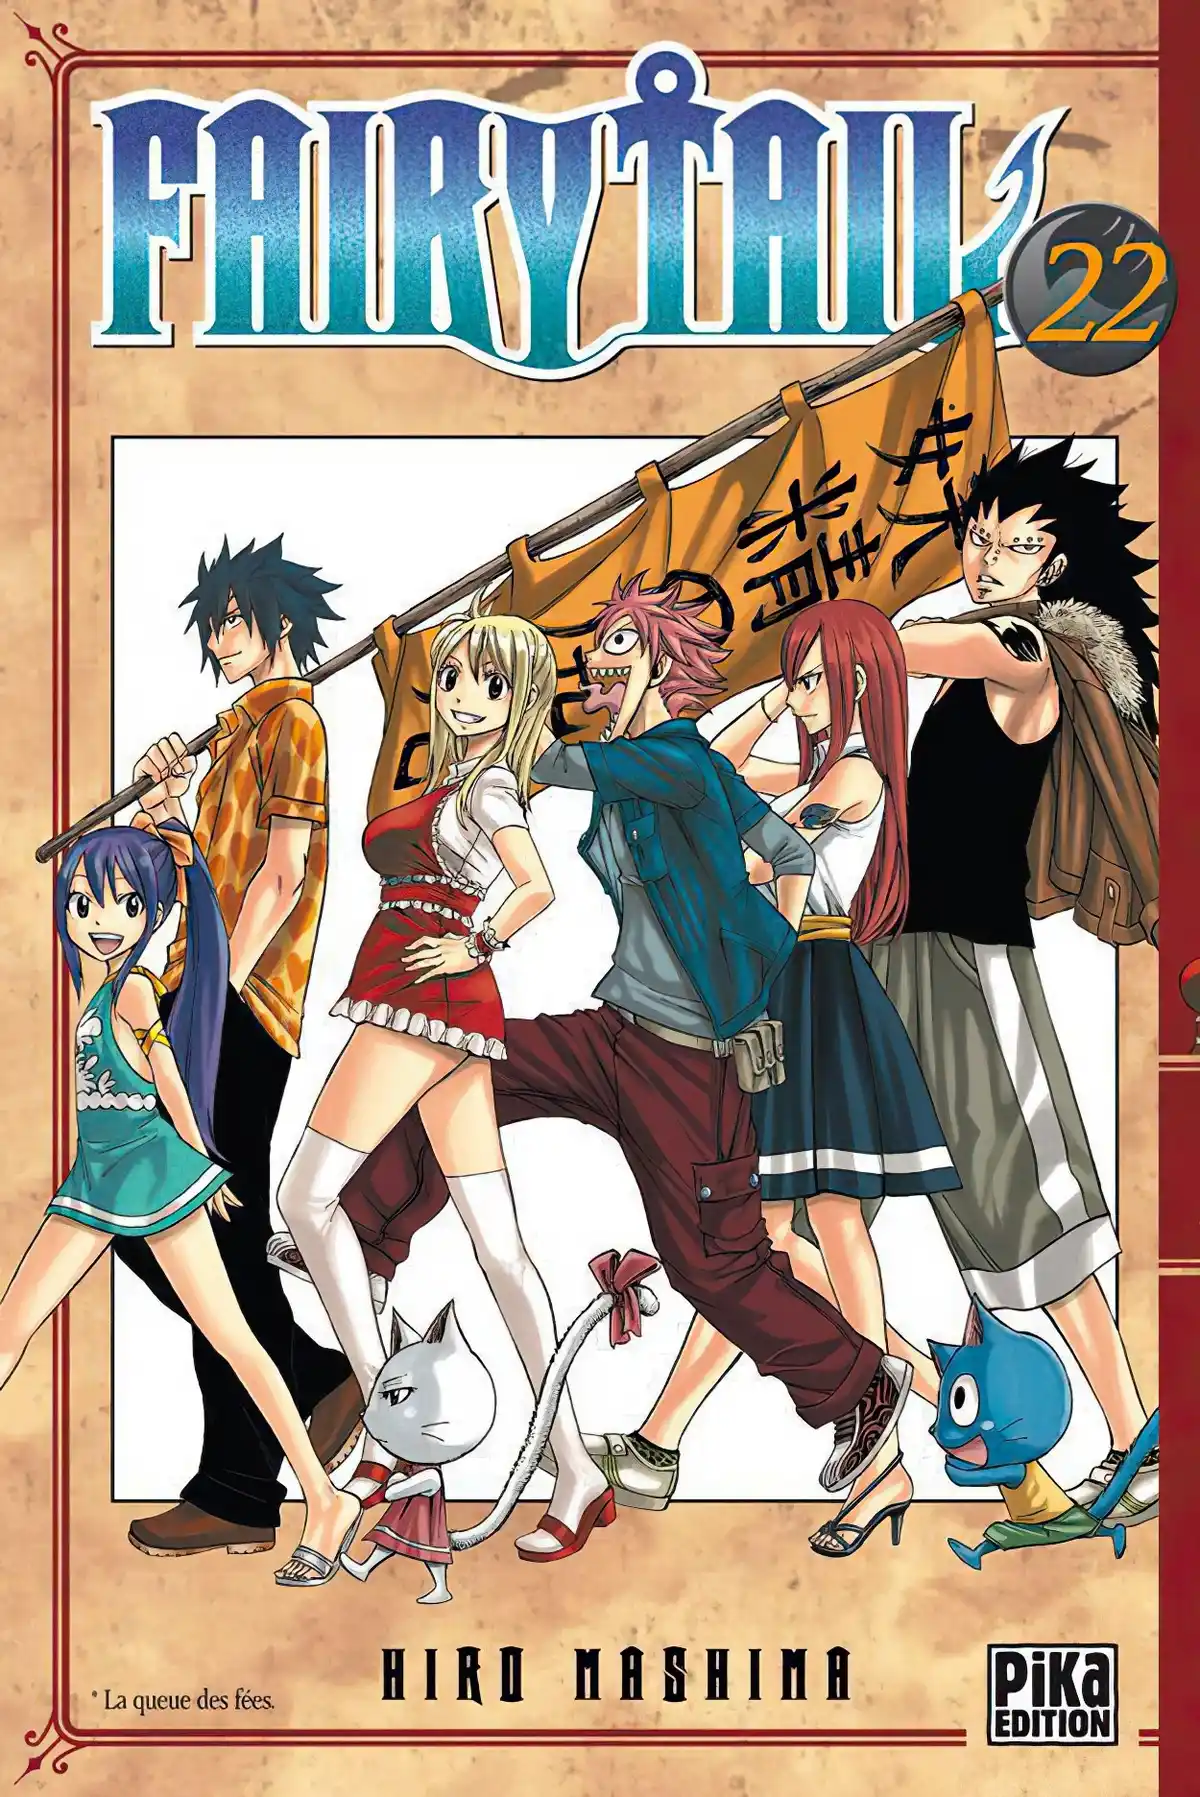 Fairy Tail Volume 22 page 1